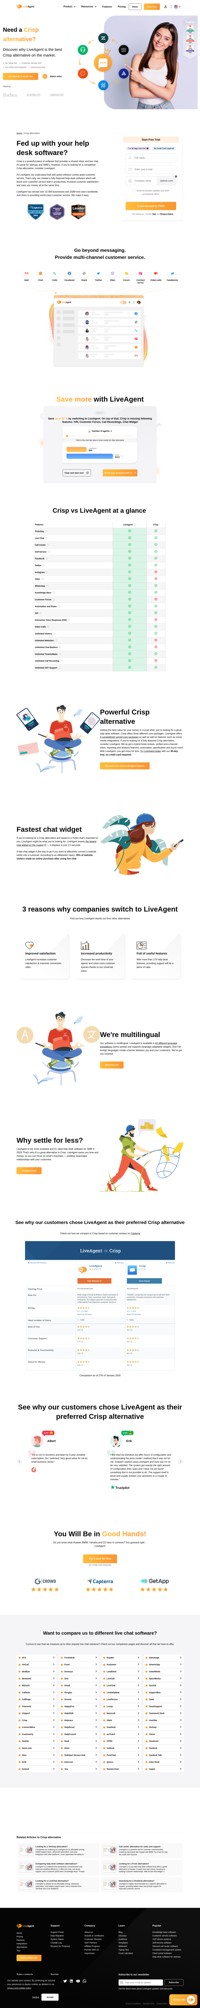 If you're looking for a powerful Crisp alternative, consider LiveAgent. It's a fully featured help desk software with the fastest chat widget.